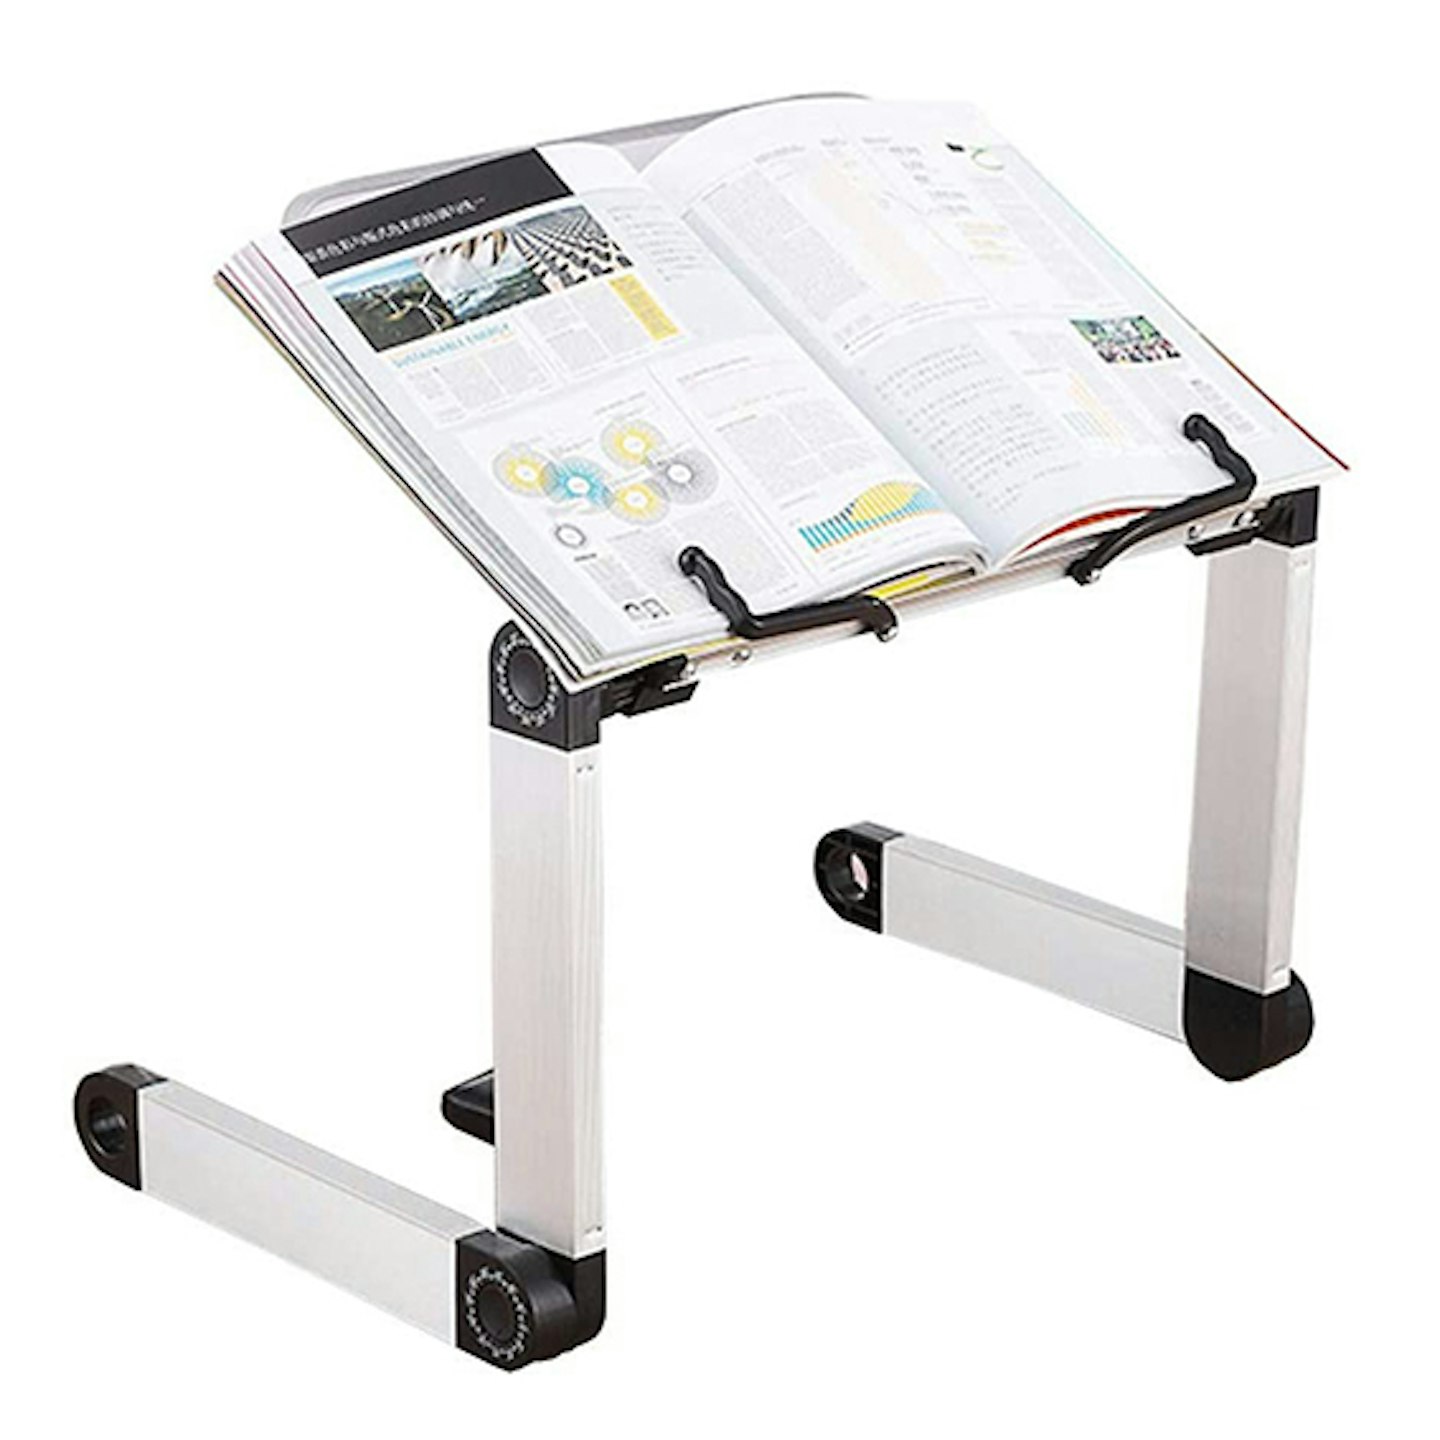 Adjustable Book Stand robotic style book holder